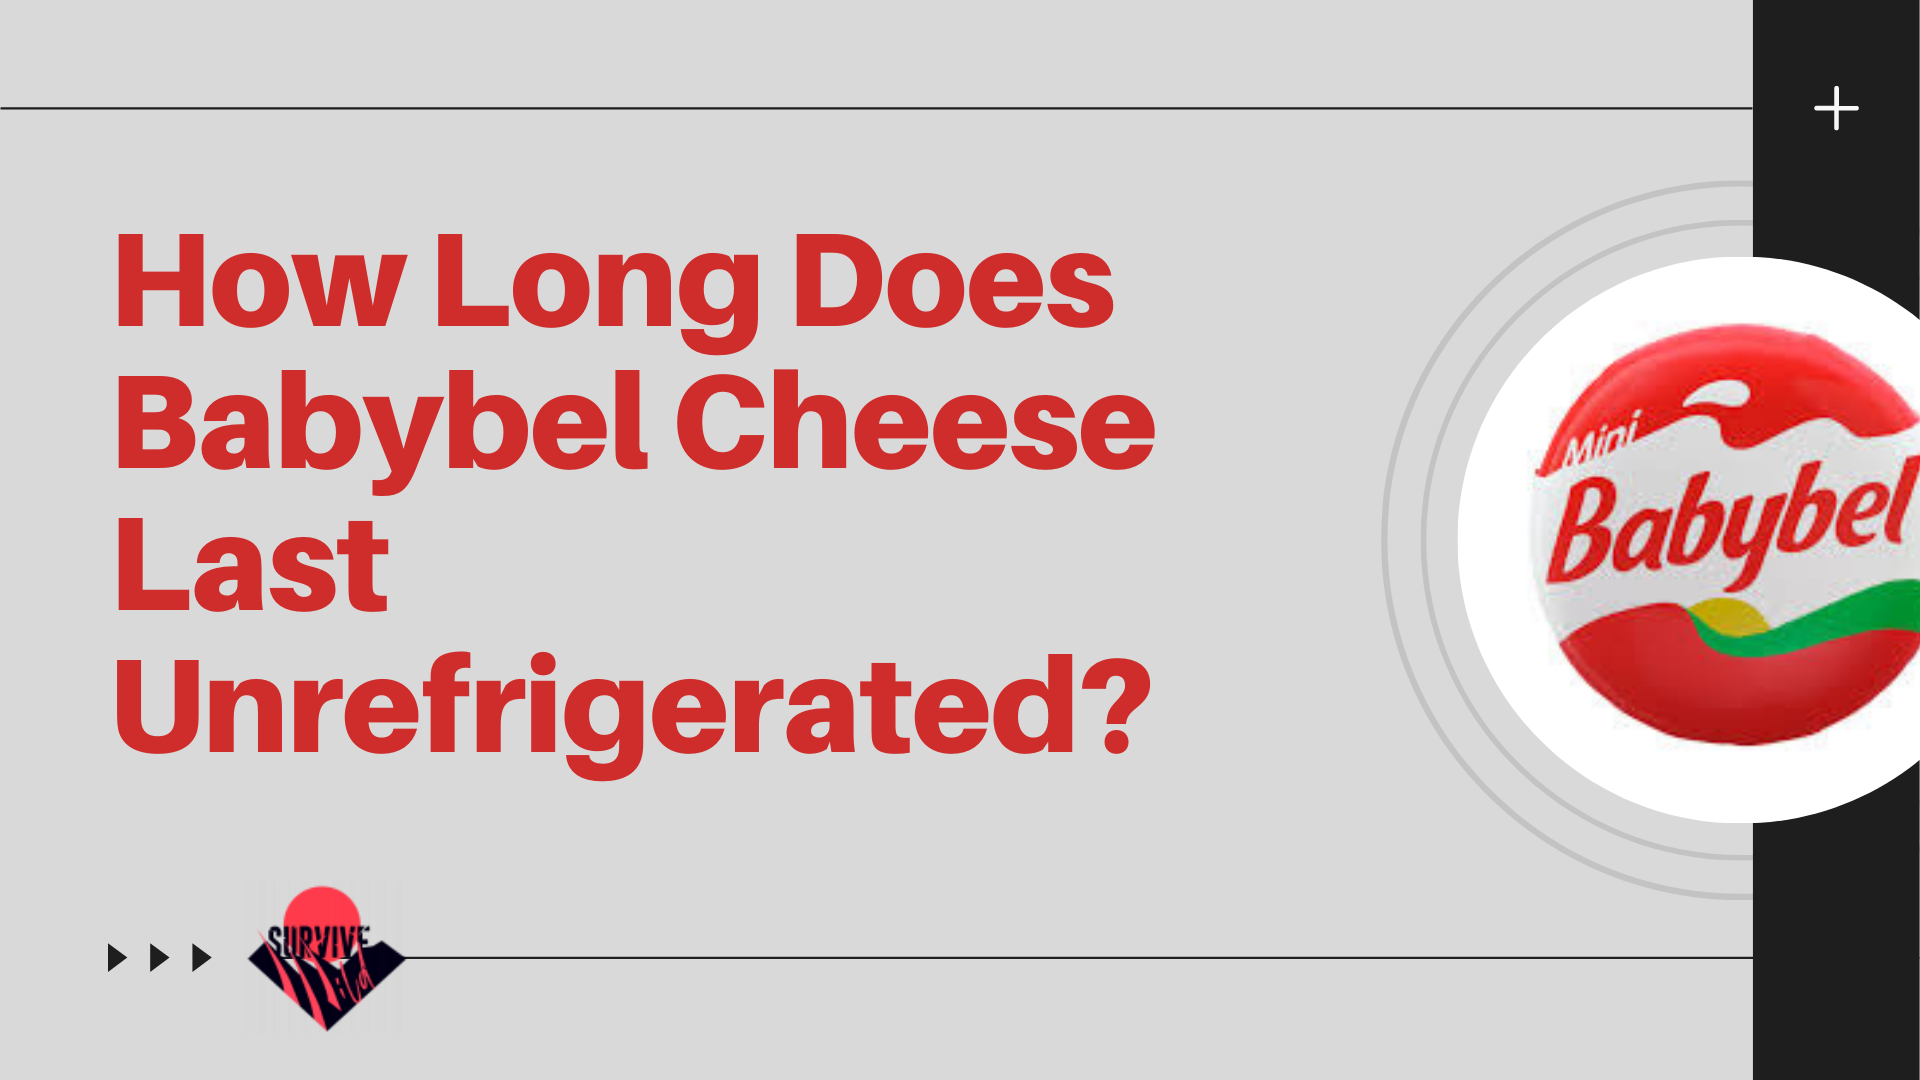 How Long Does Babybel Cheese Last Unrefrigerated?